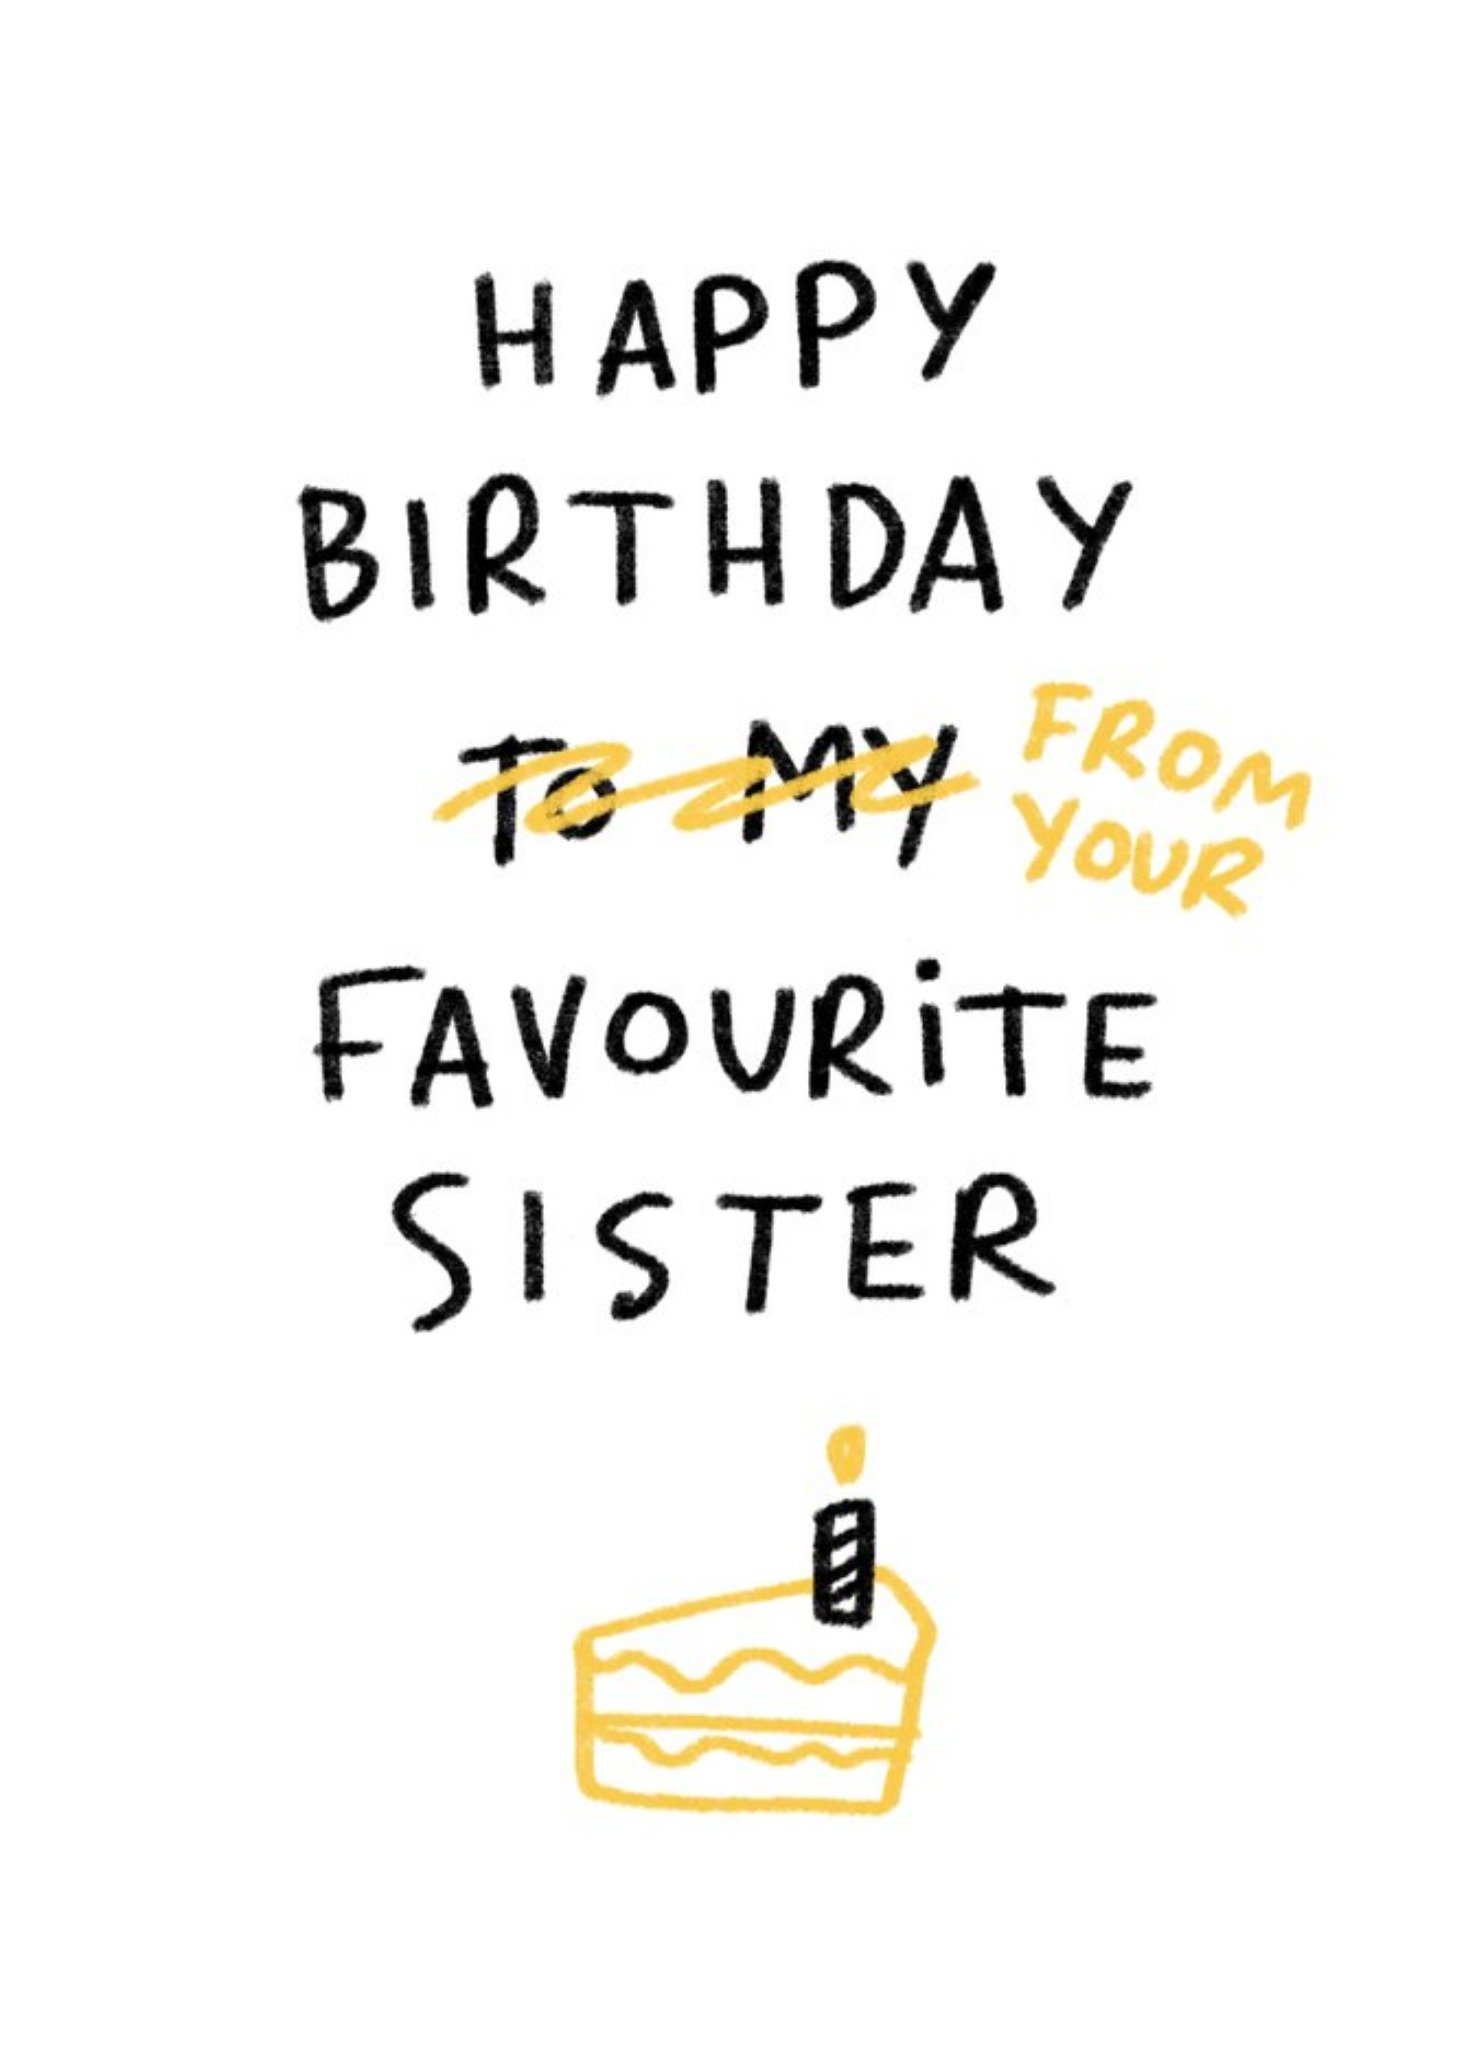 Moonpig Happy Birthday From Your Favourite Sister Funny Card Ecard